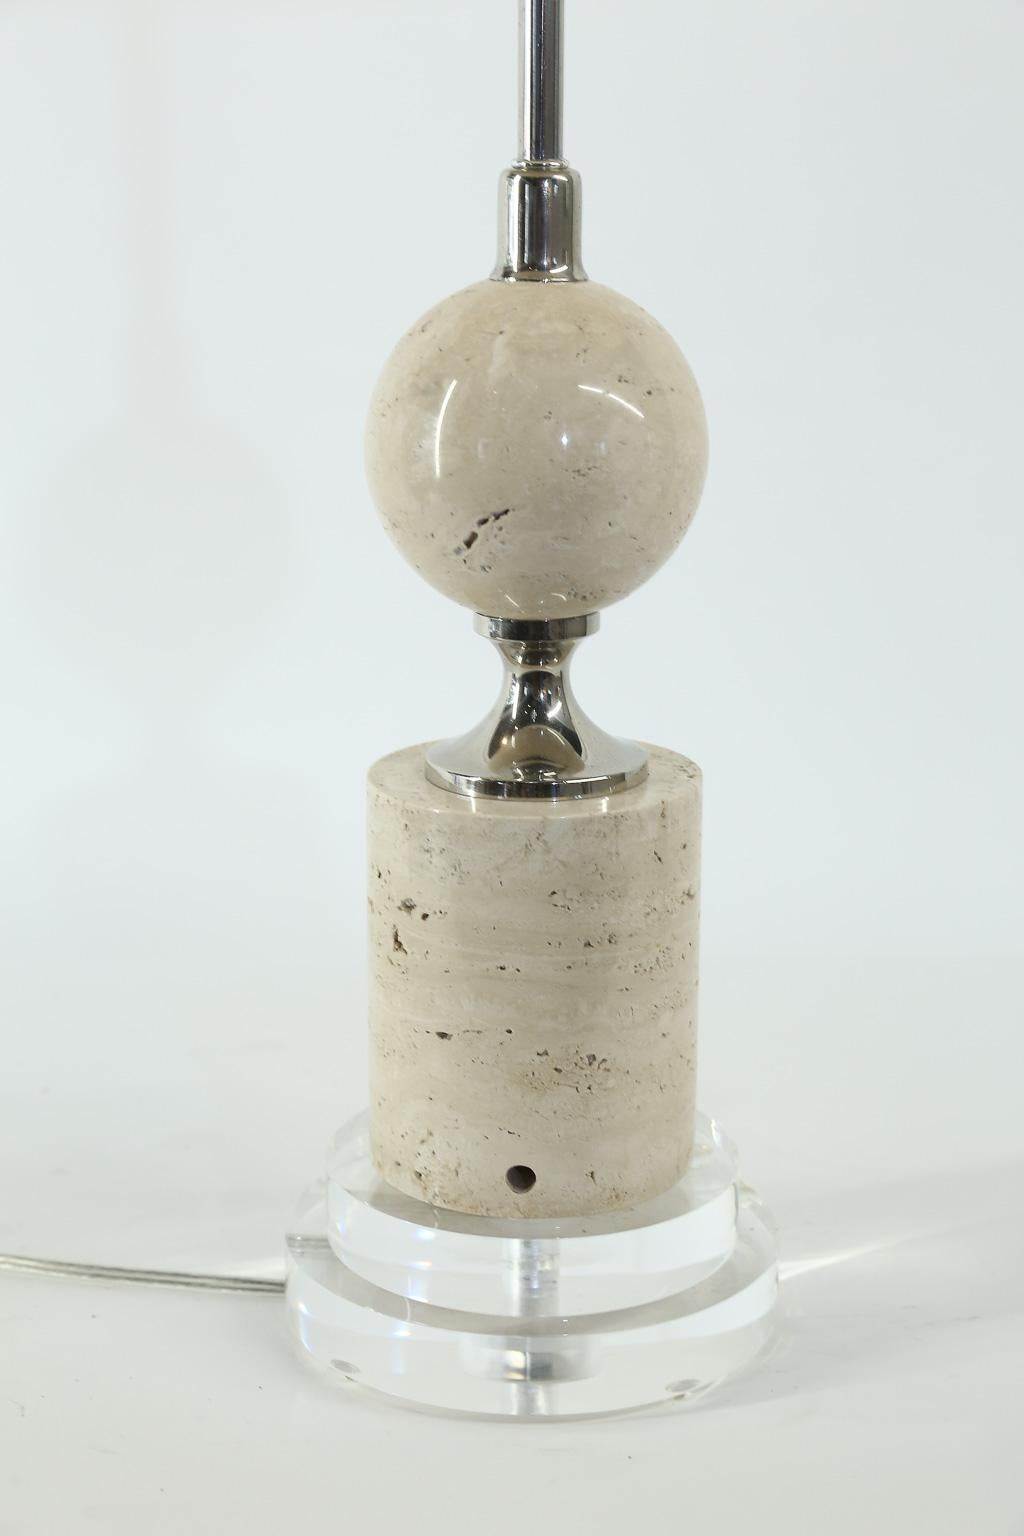 This is a newly restored and wired midcentury French table lamp. Made of travertine, chrome and acrylic, this piece will add the Mid-Century Modern touch to any room. The shade is included and measures 14 inches in diameter and 10 inches high.